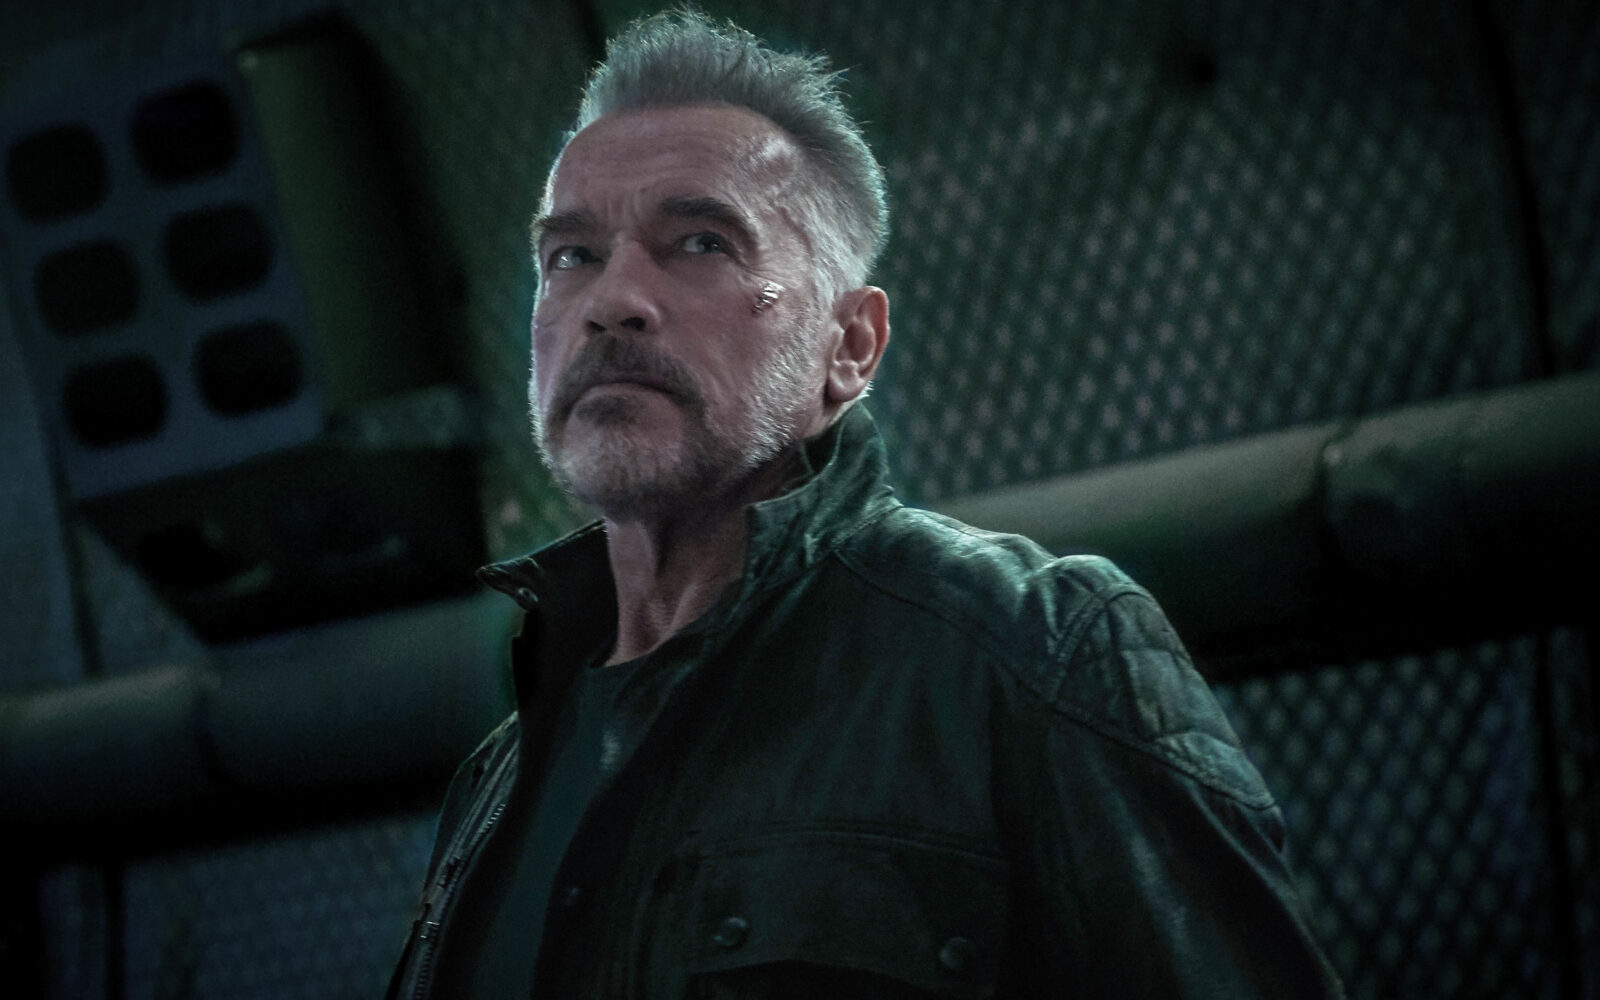 The First Trailer For The New Terminator Movie Looks… Good? MOJEH MEN